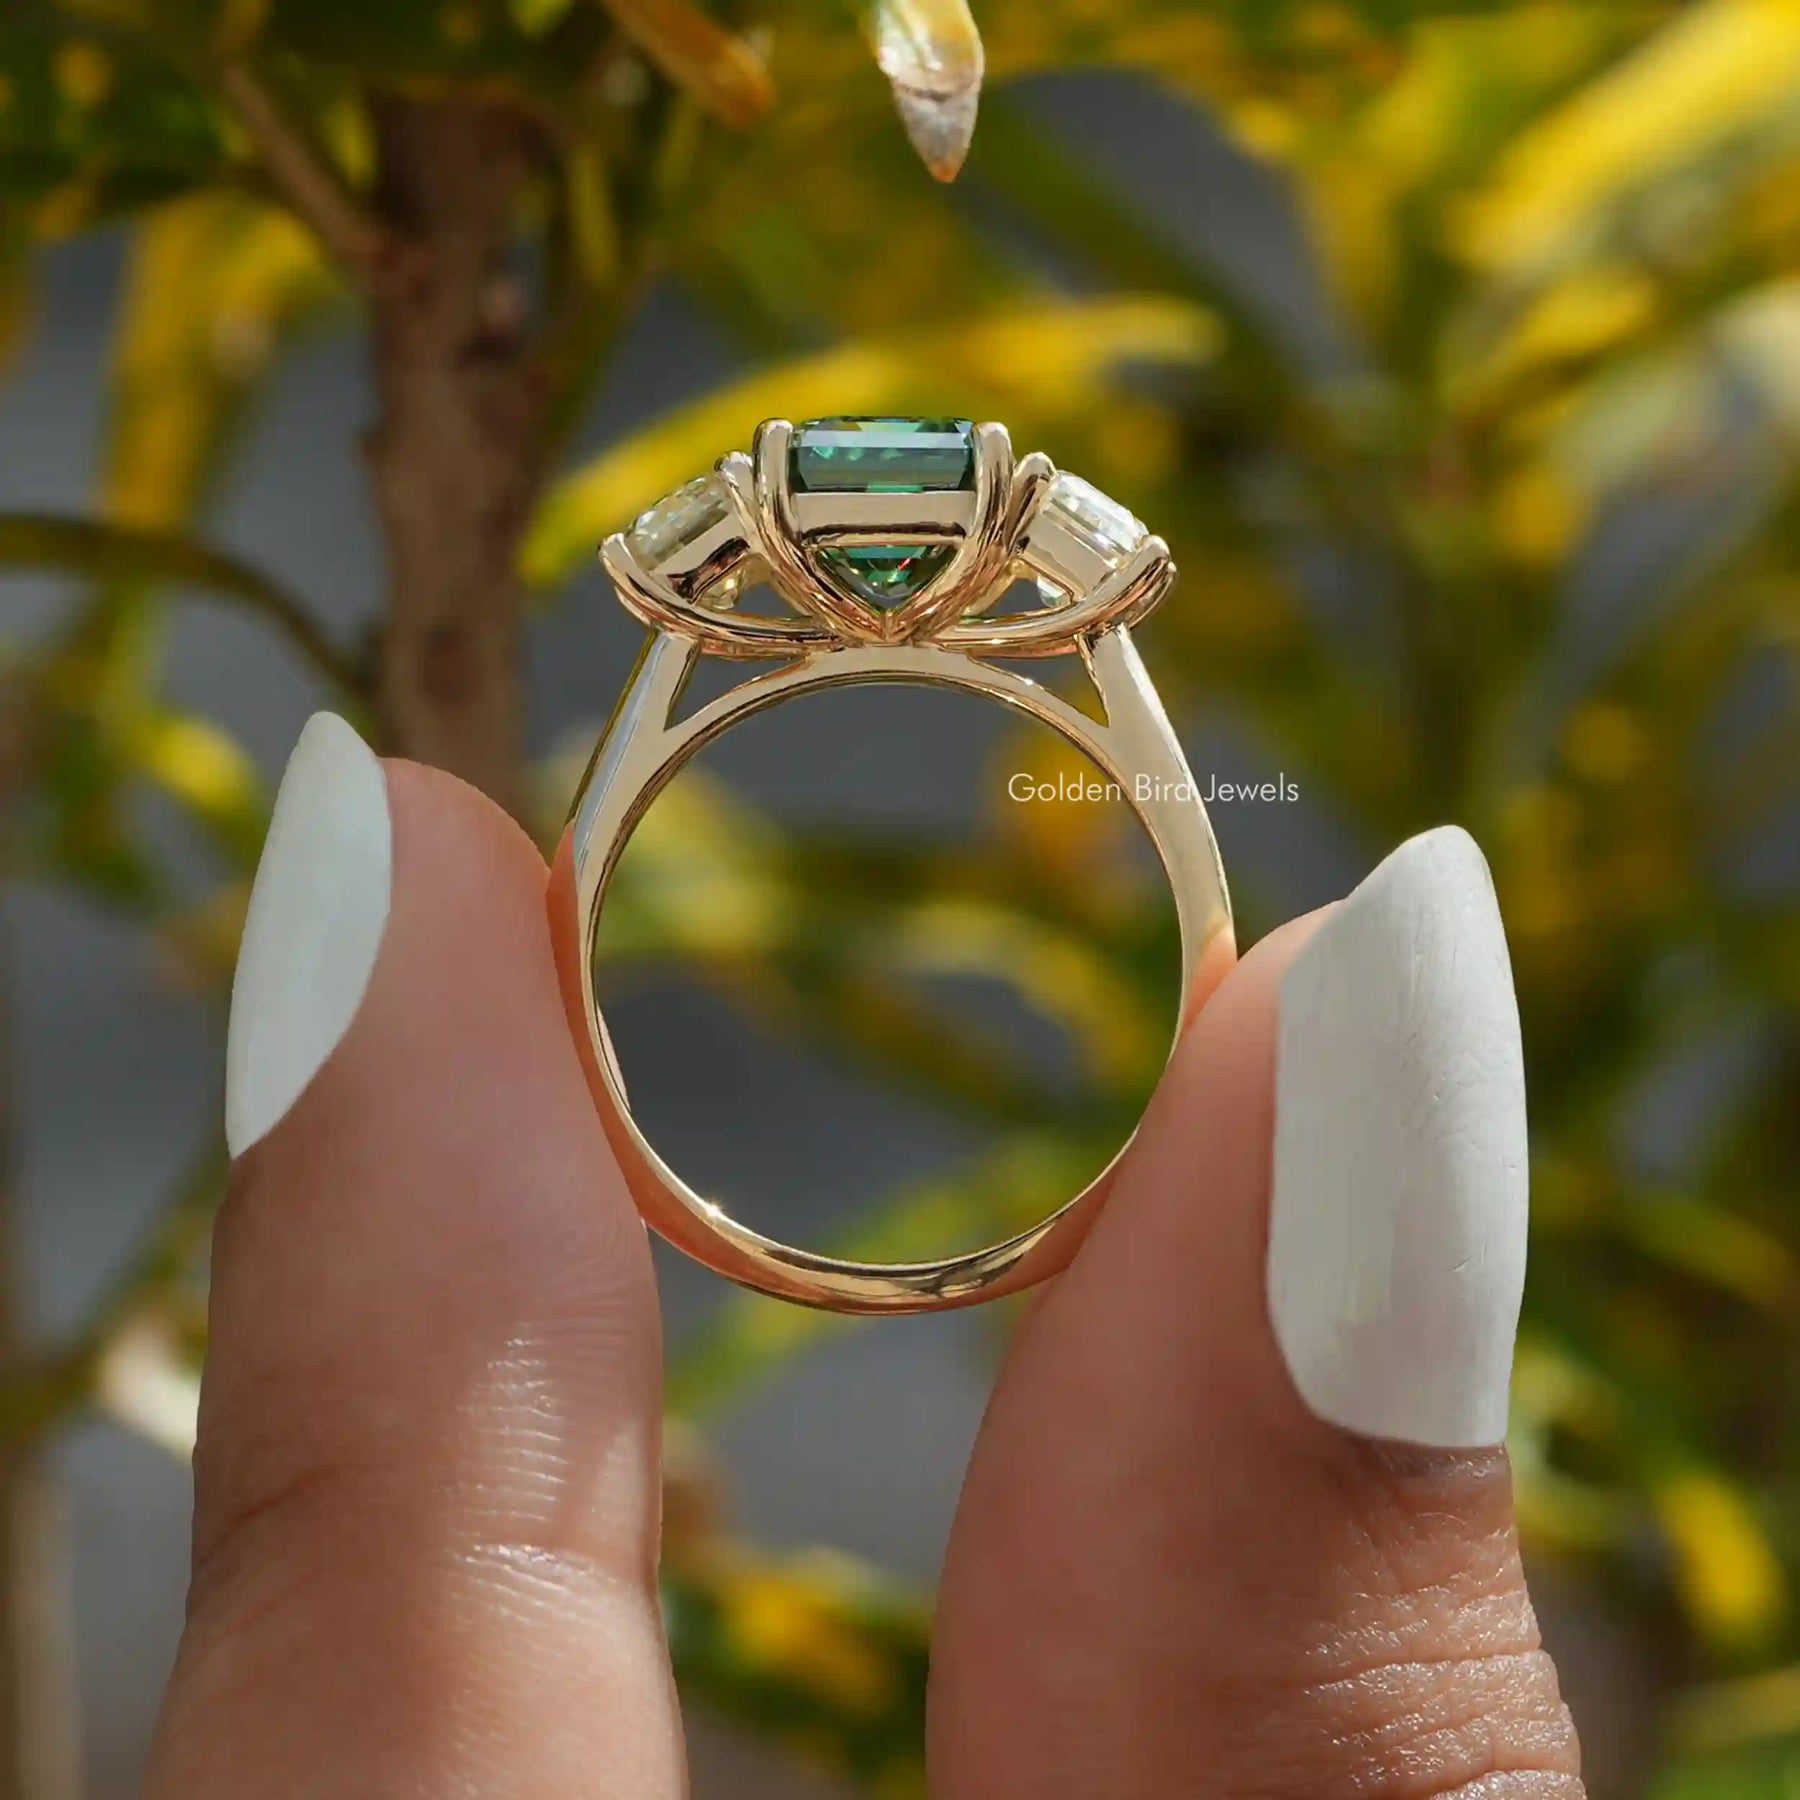 [This 3 stone emerald cut engagement ring set in shank setting]-[Golden Bird Jewels]